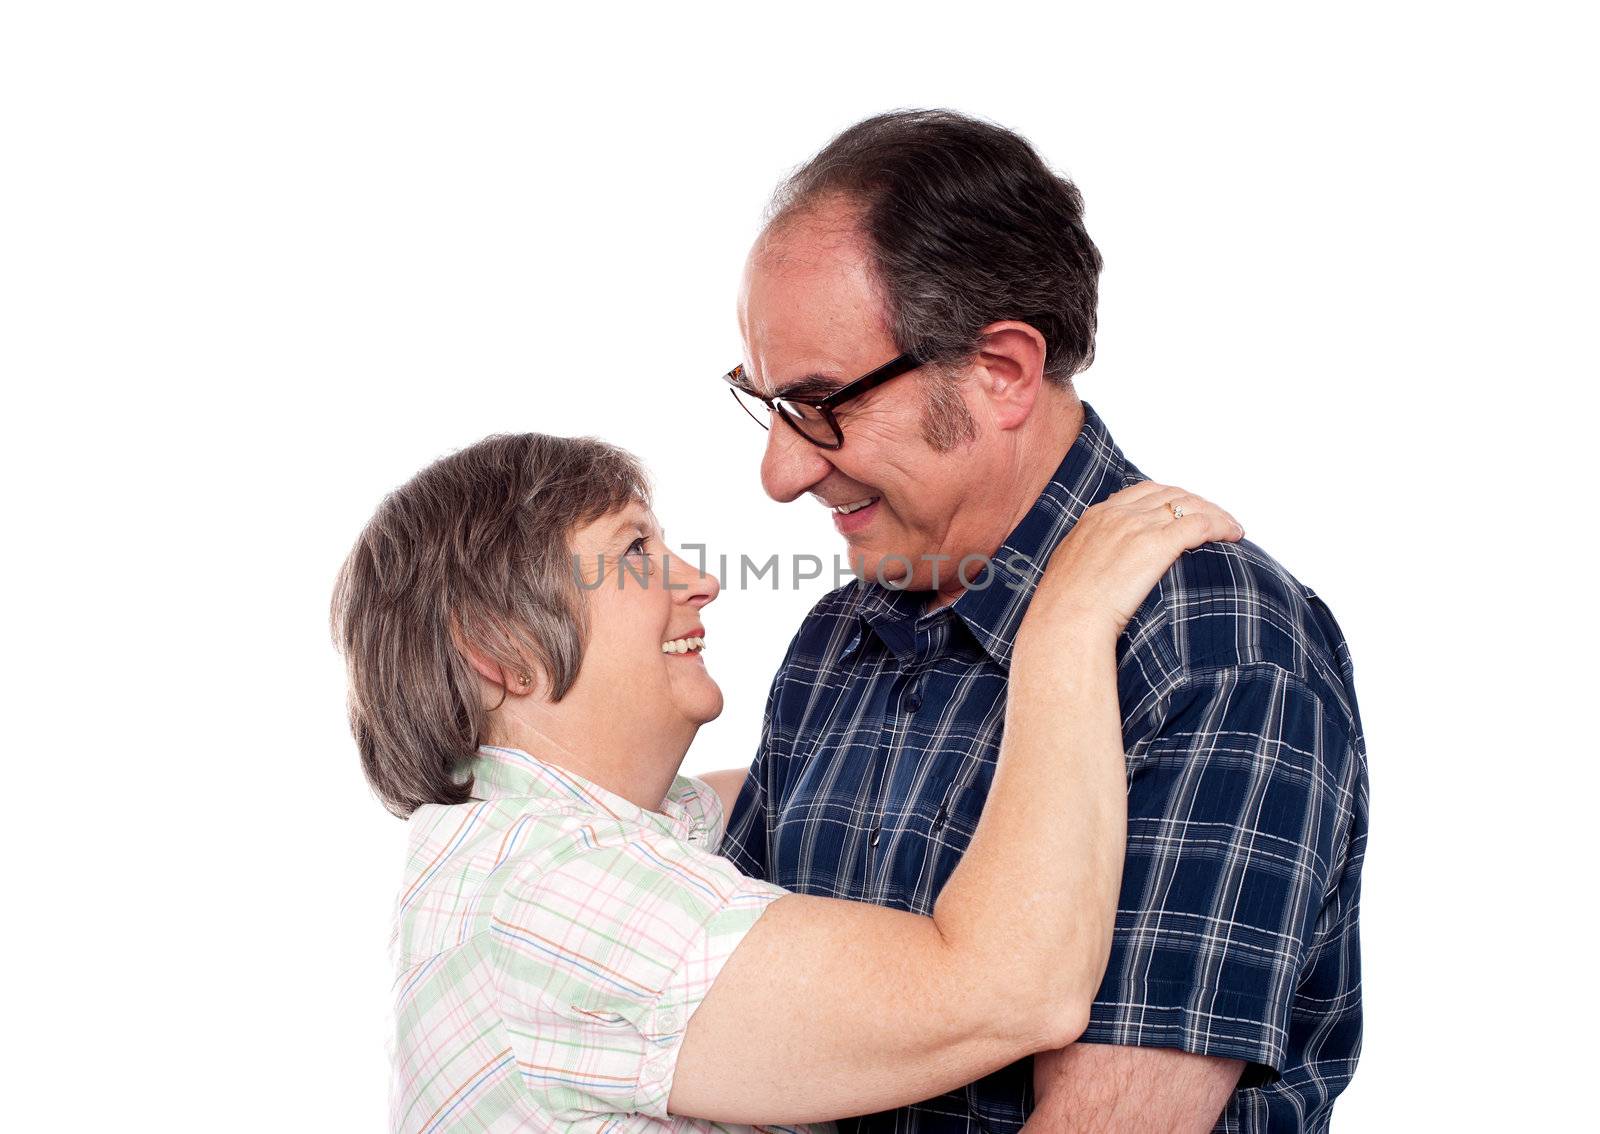 Aged couple in a romantic mood by stockyimages